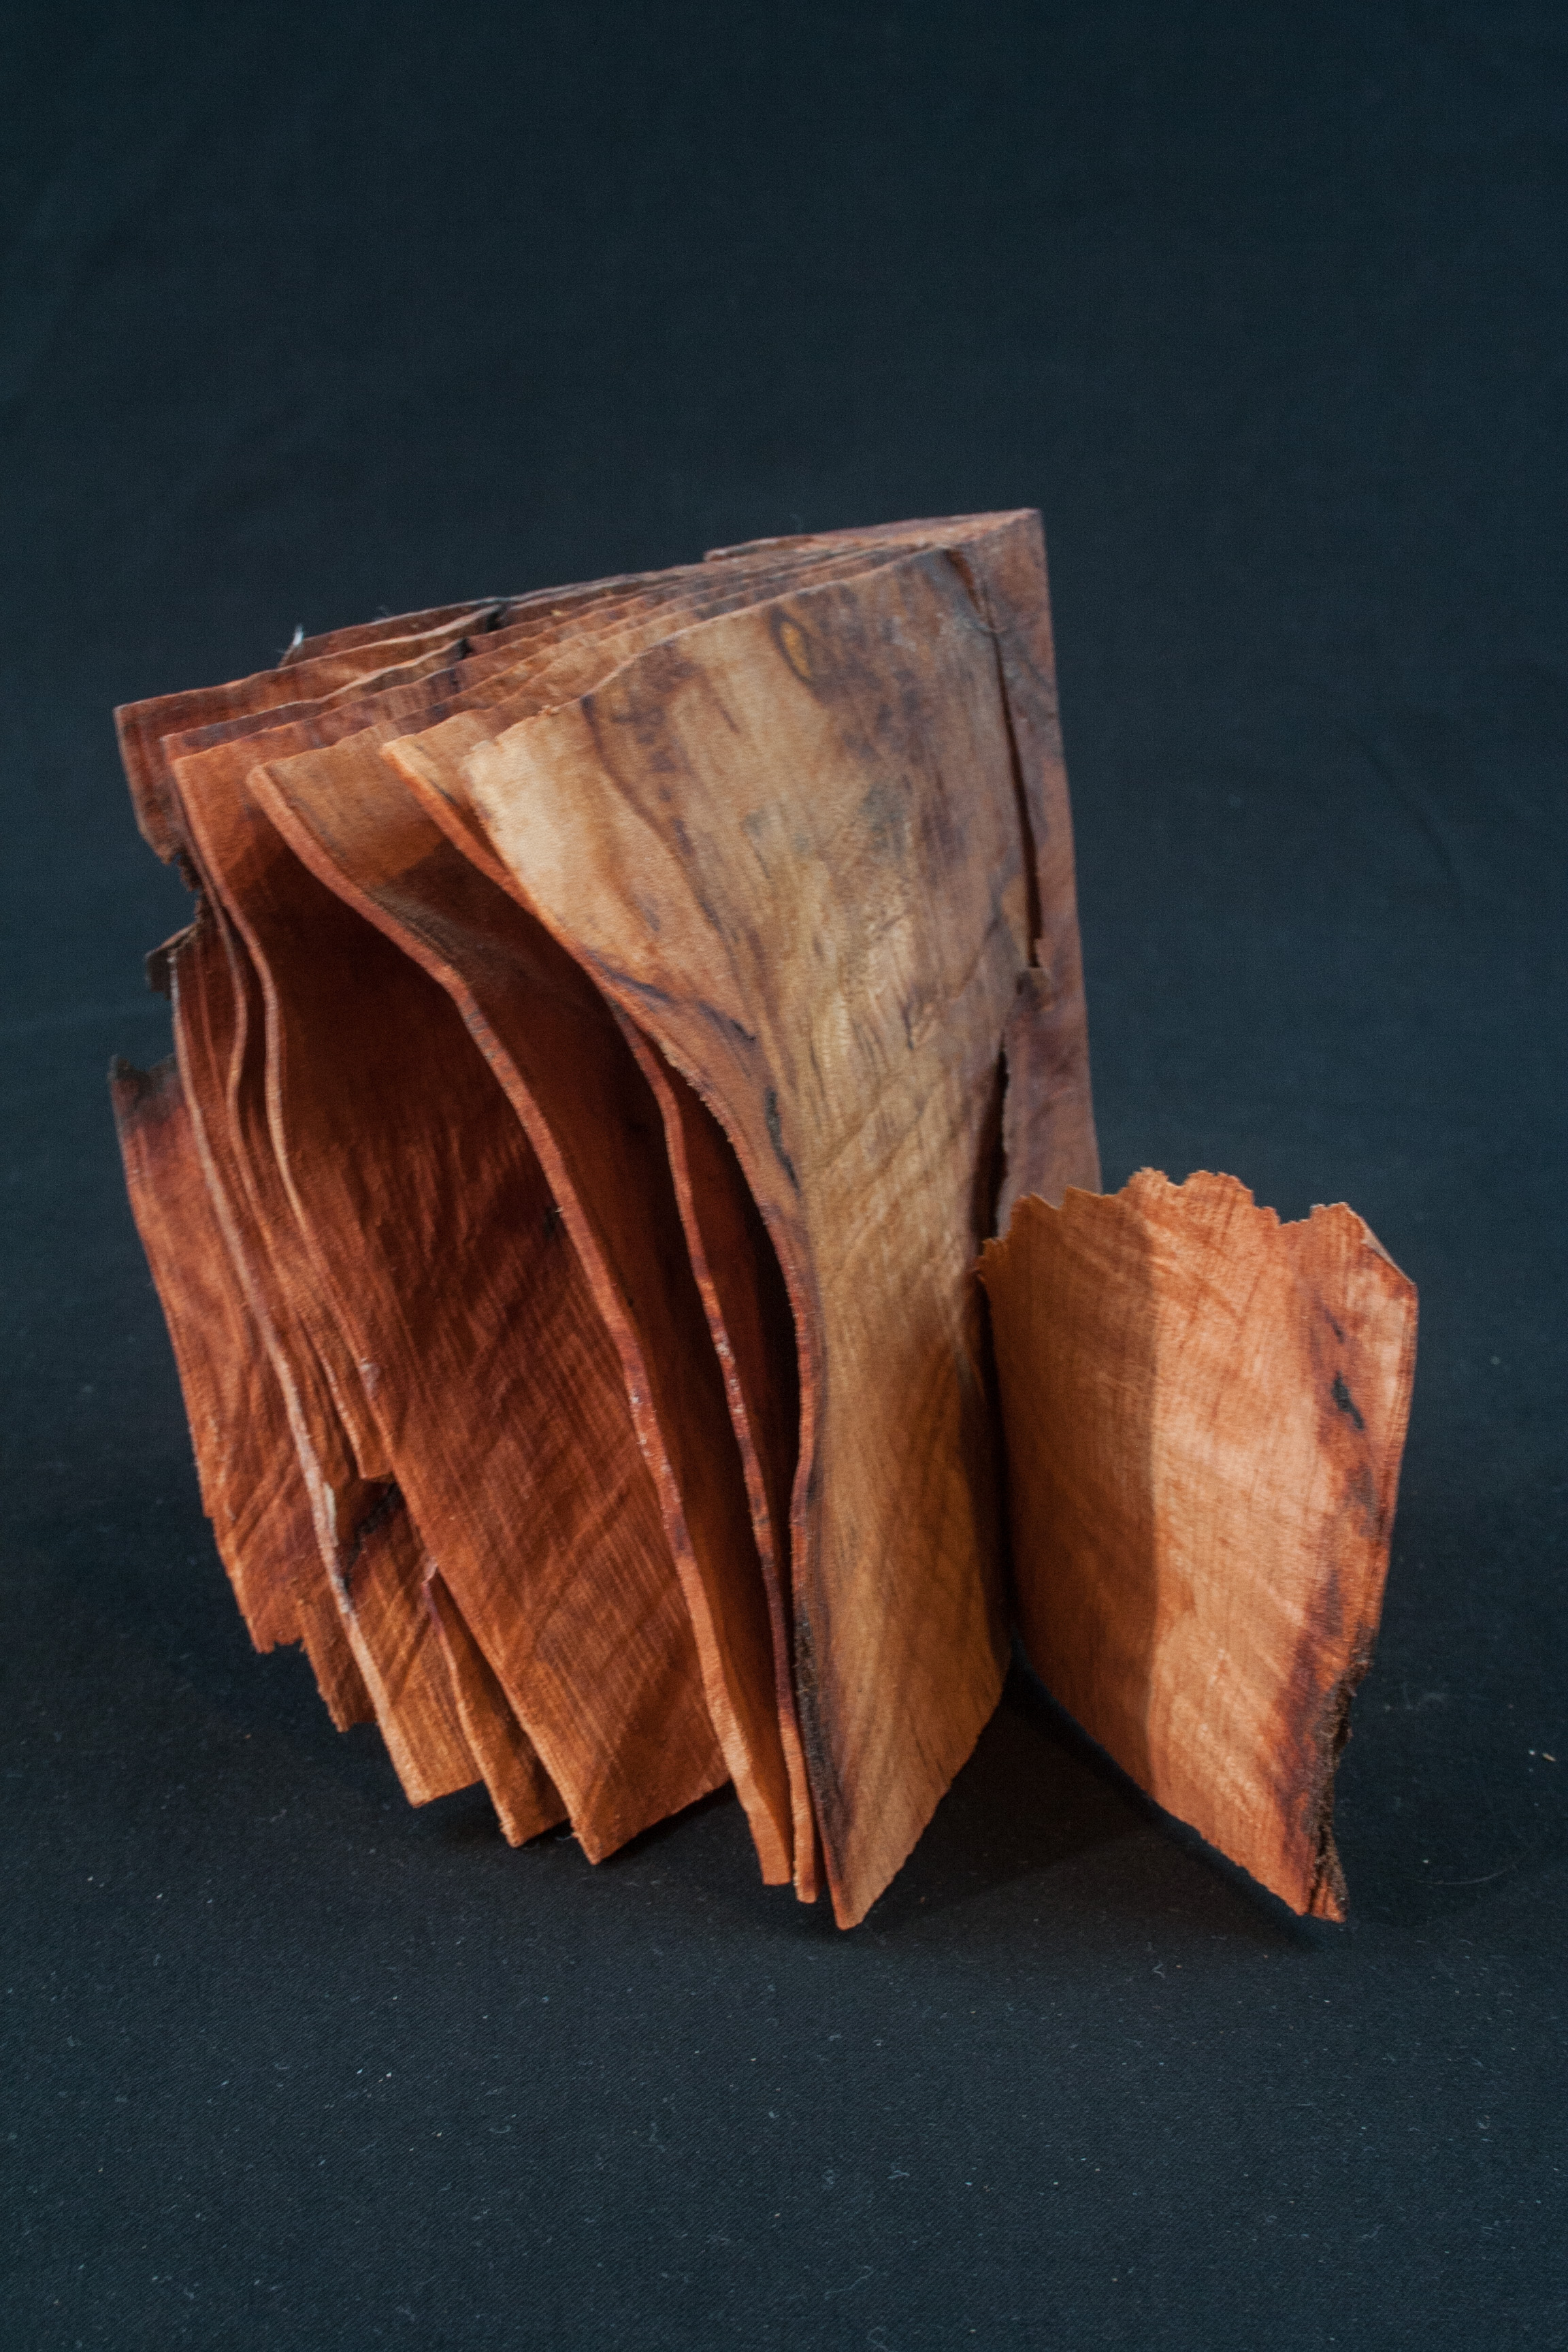 101 Madrone Root Distorted Book 5 x 4,5......$59.....Currently displayed at "Dan McGeorge Gallery" in Jacksonville Oregon.....SOLD